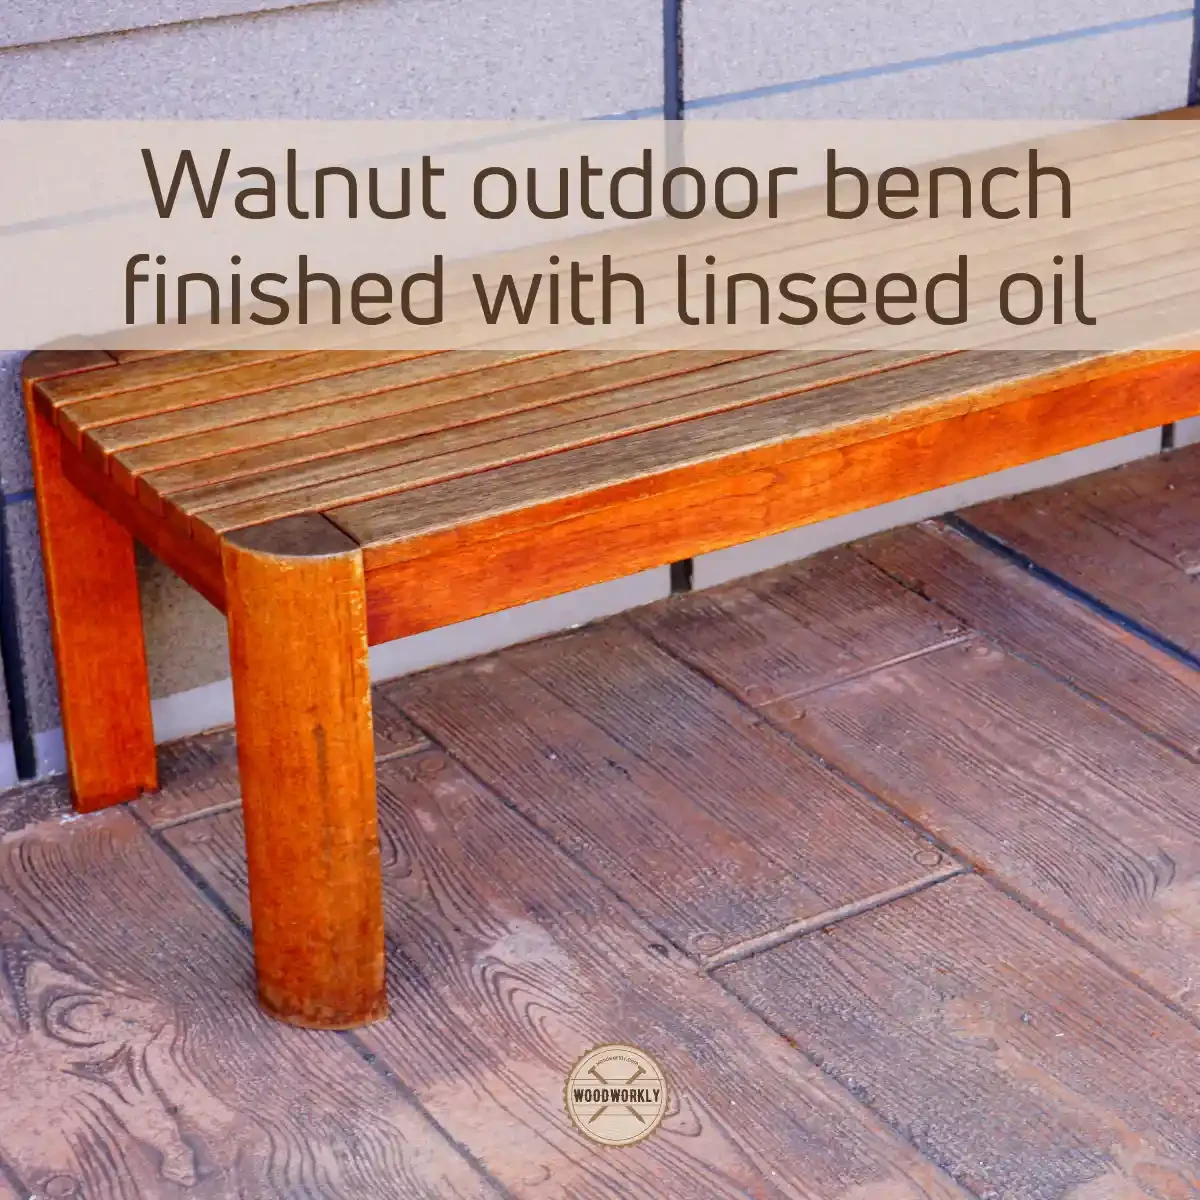 Walnut outdoor bench finished with linseed oil